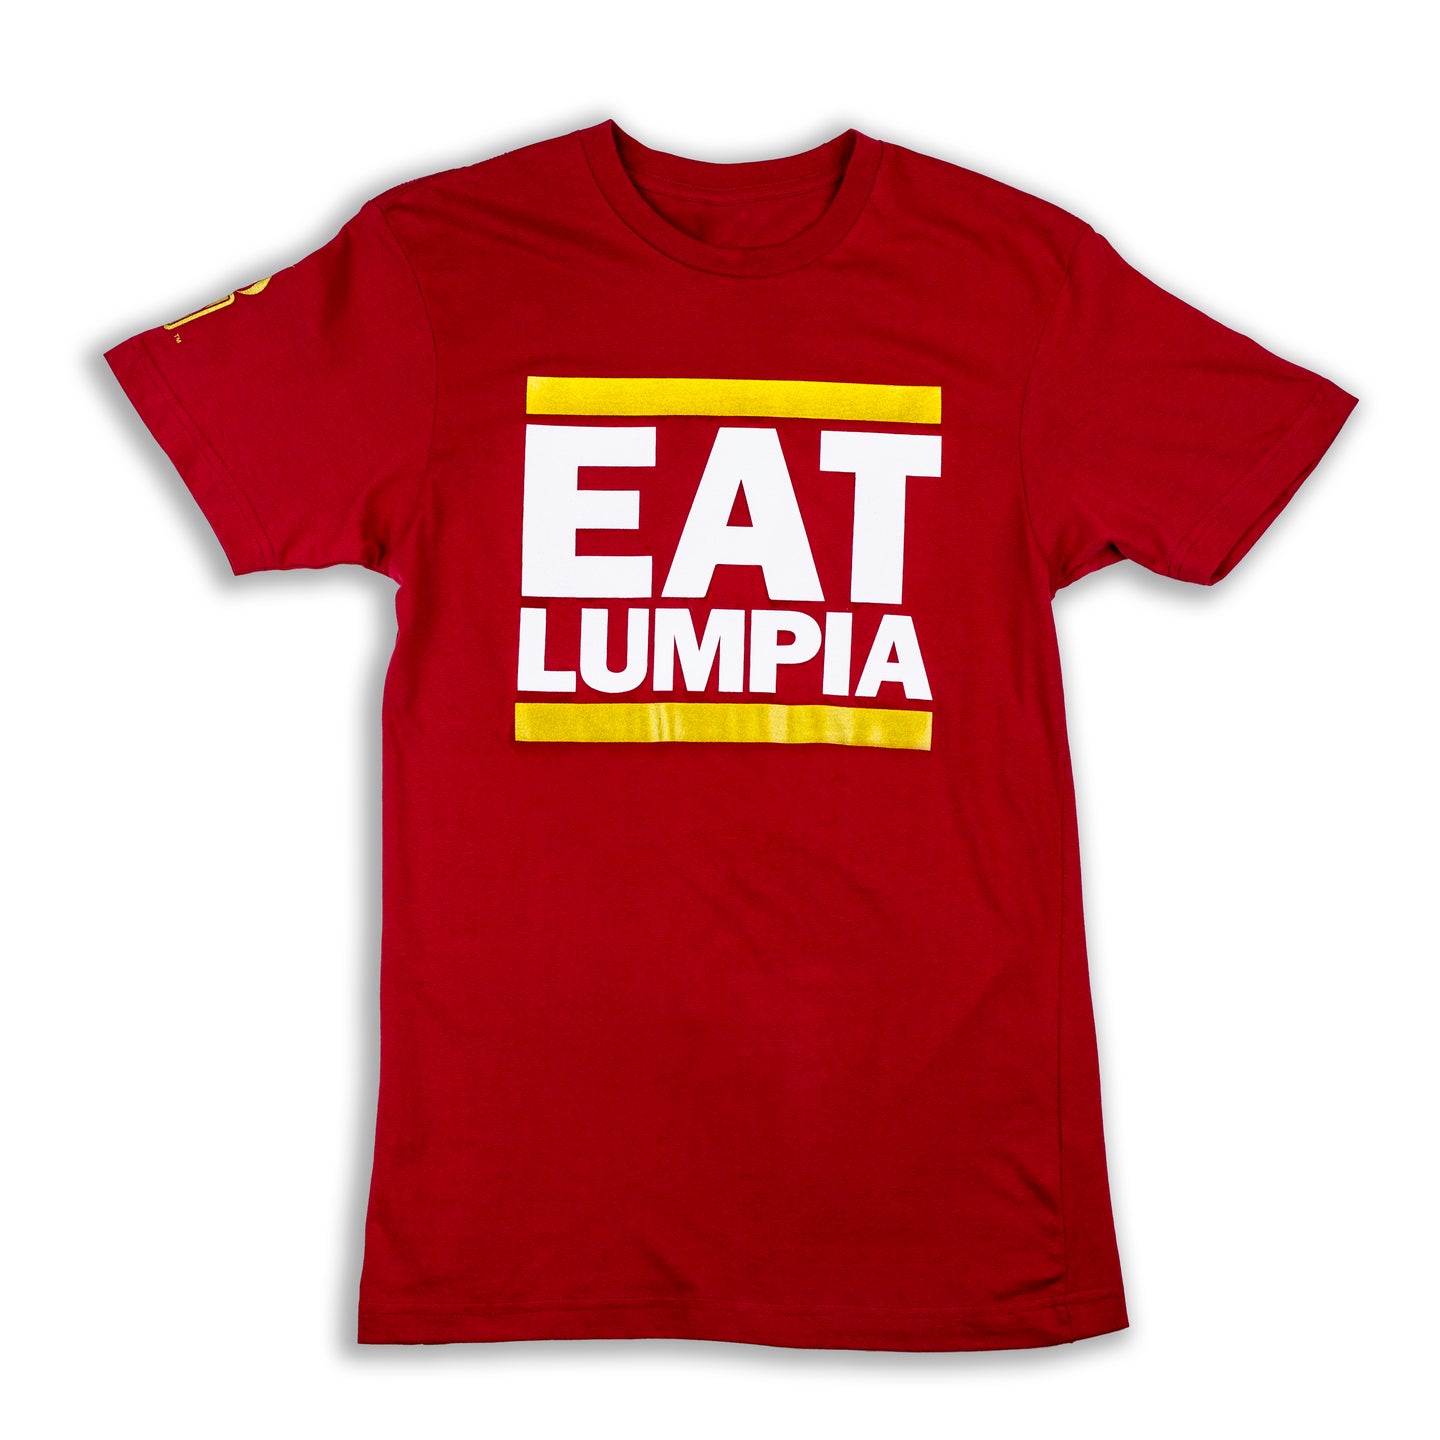 Eat Lumpia T-Shirt 49ers Inspired